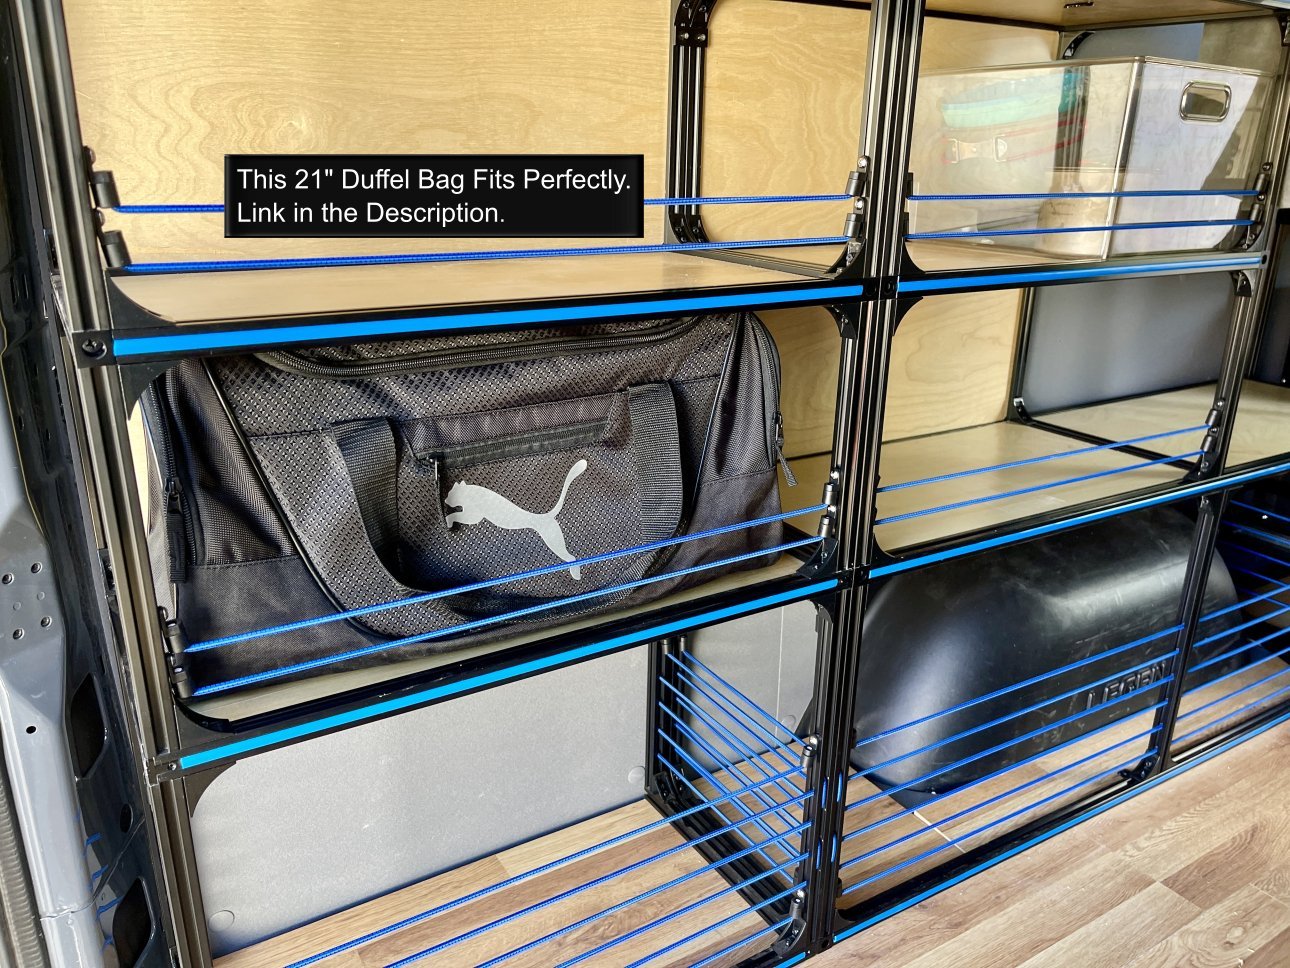 camper van shelving cabinets with duffel bag, front view